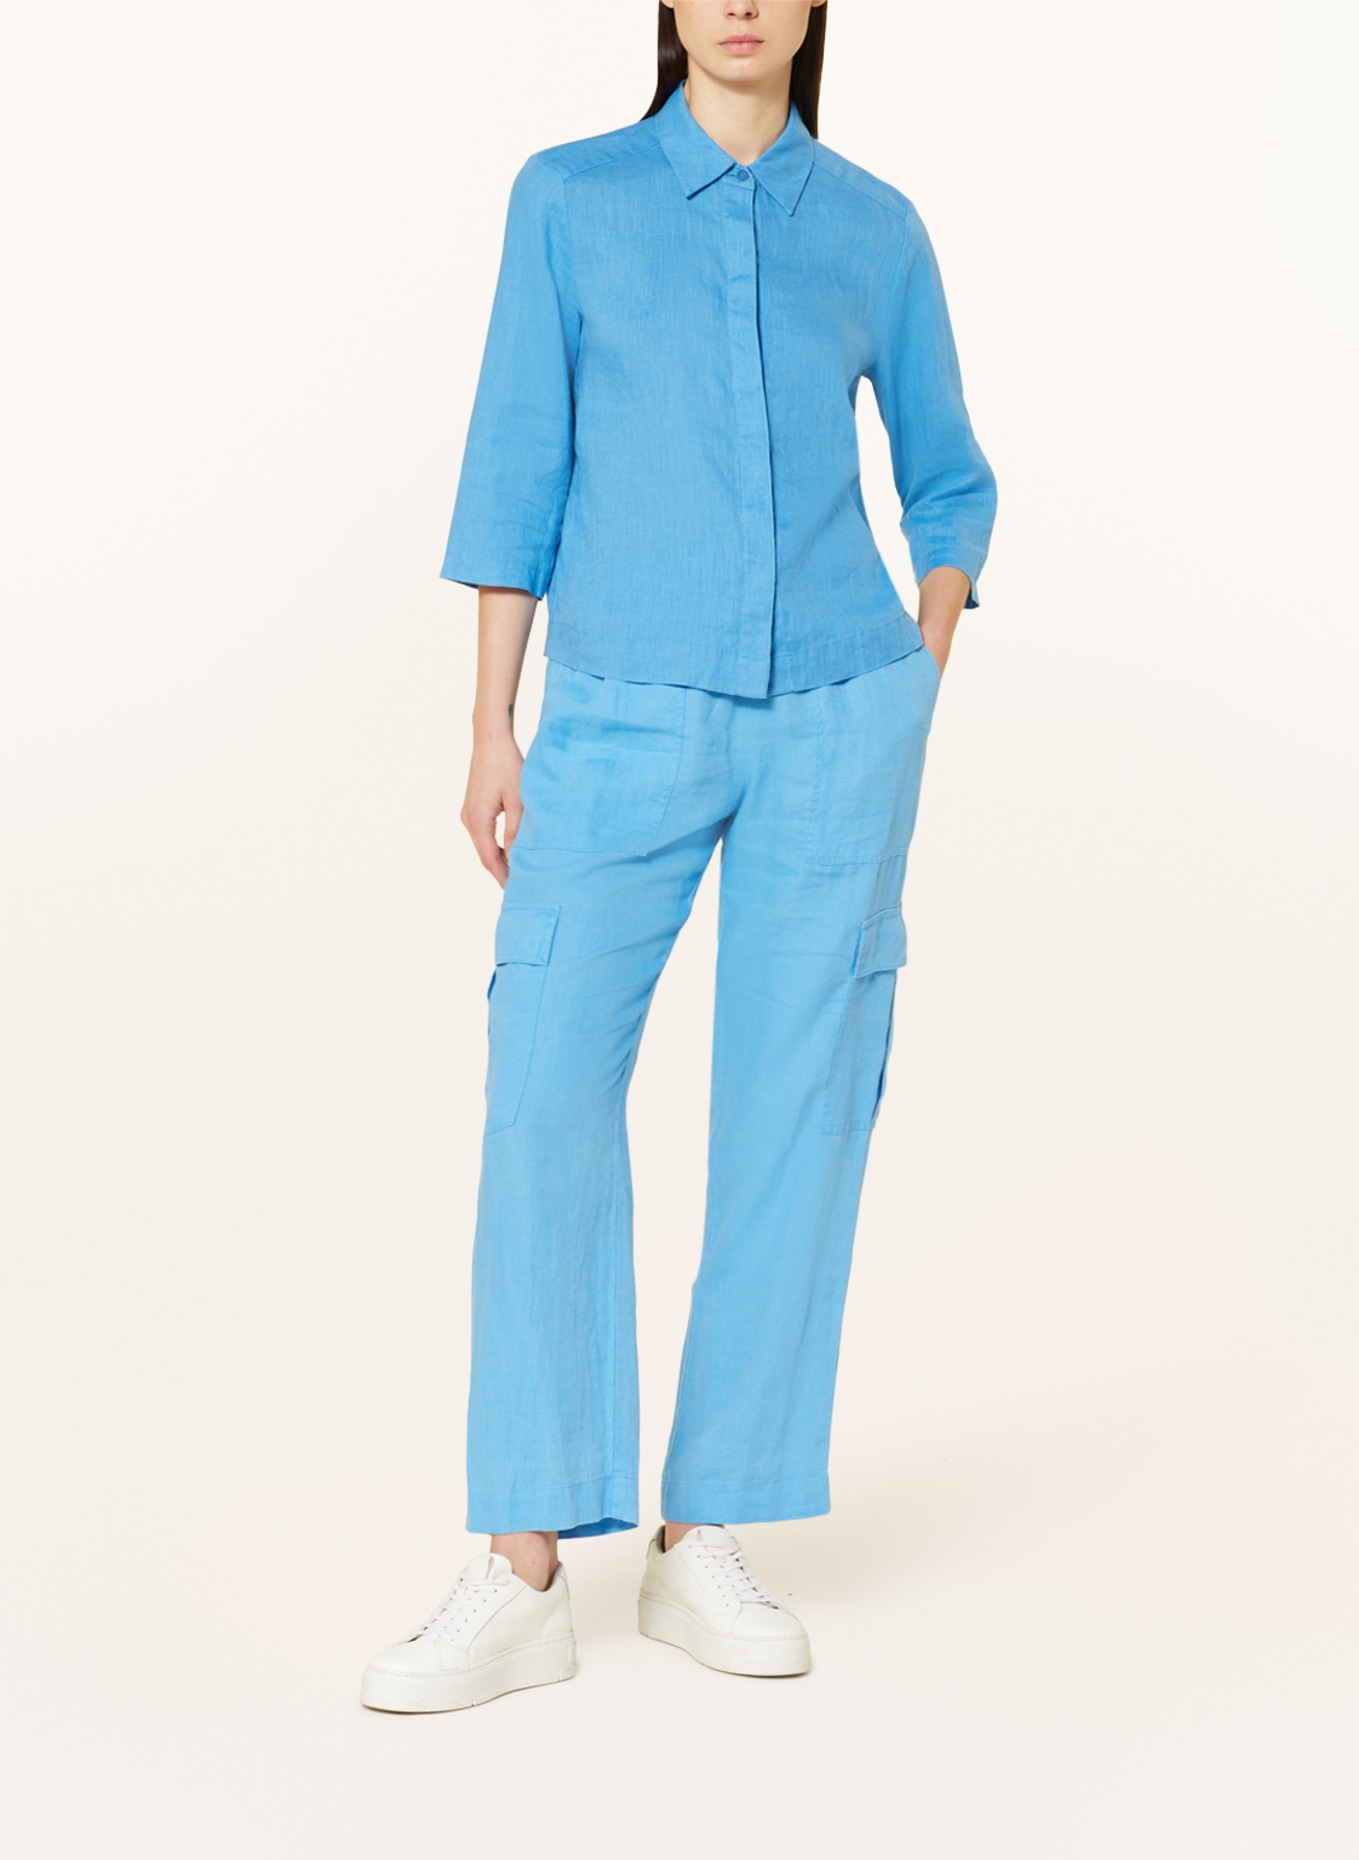 MARC AUREL Shirt blouse made of linen with 3/4 sleeves, Color: BLUE (Image 2)